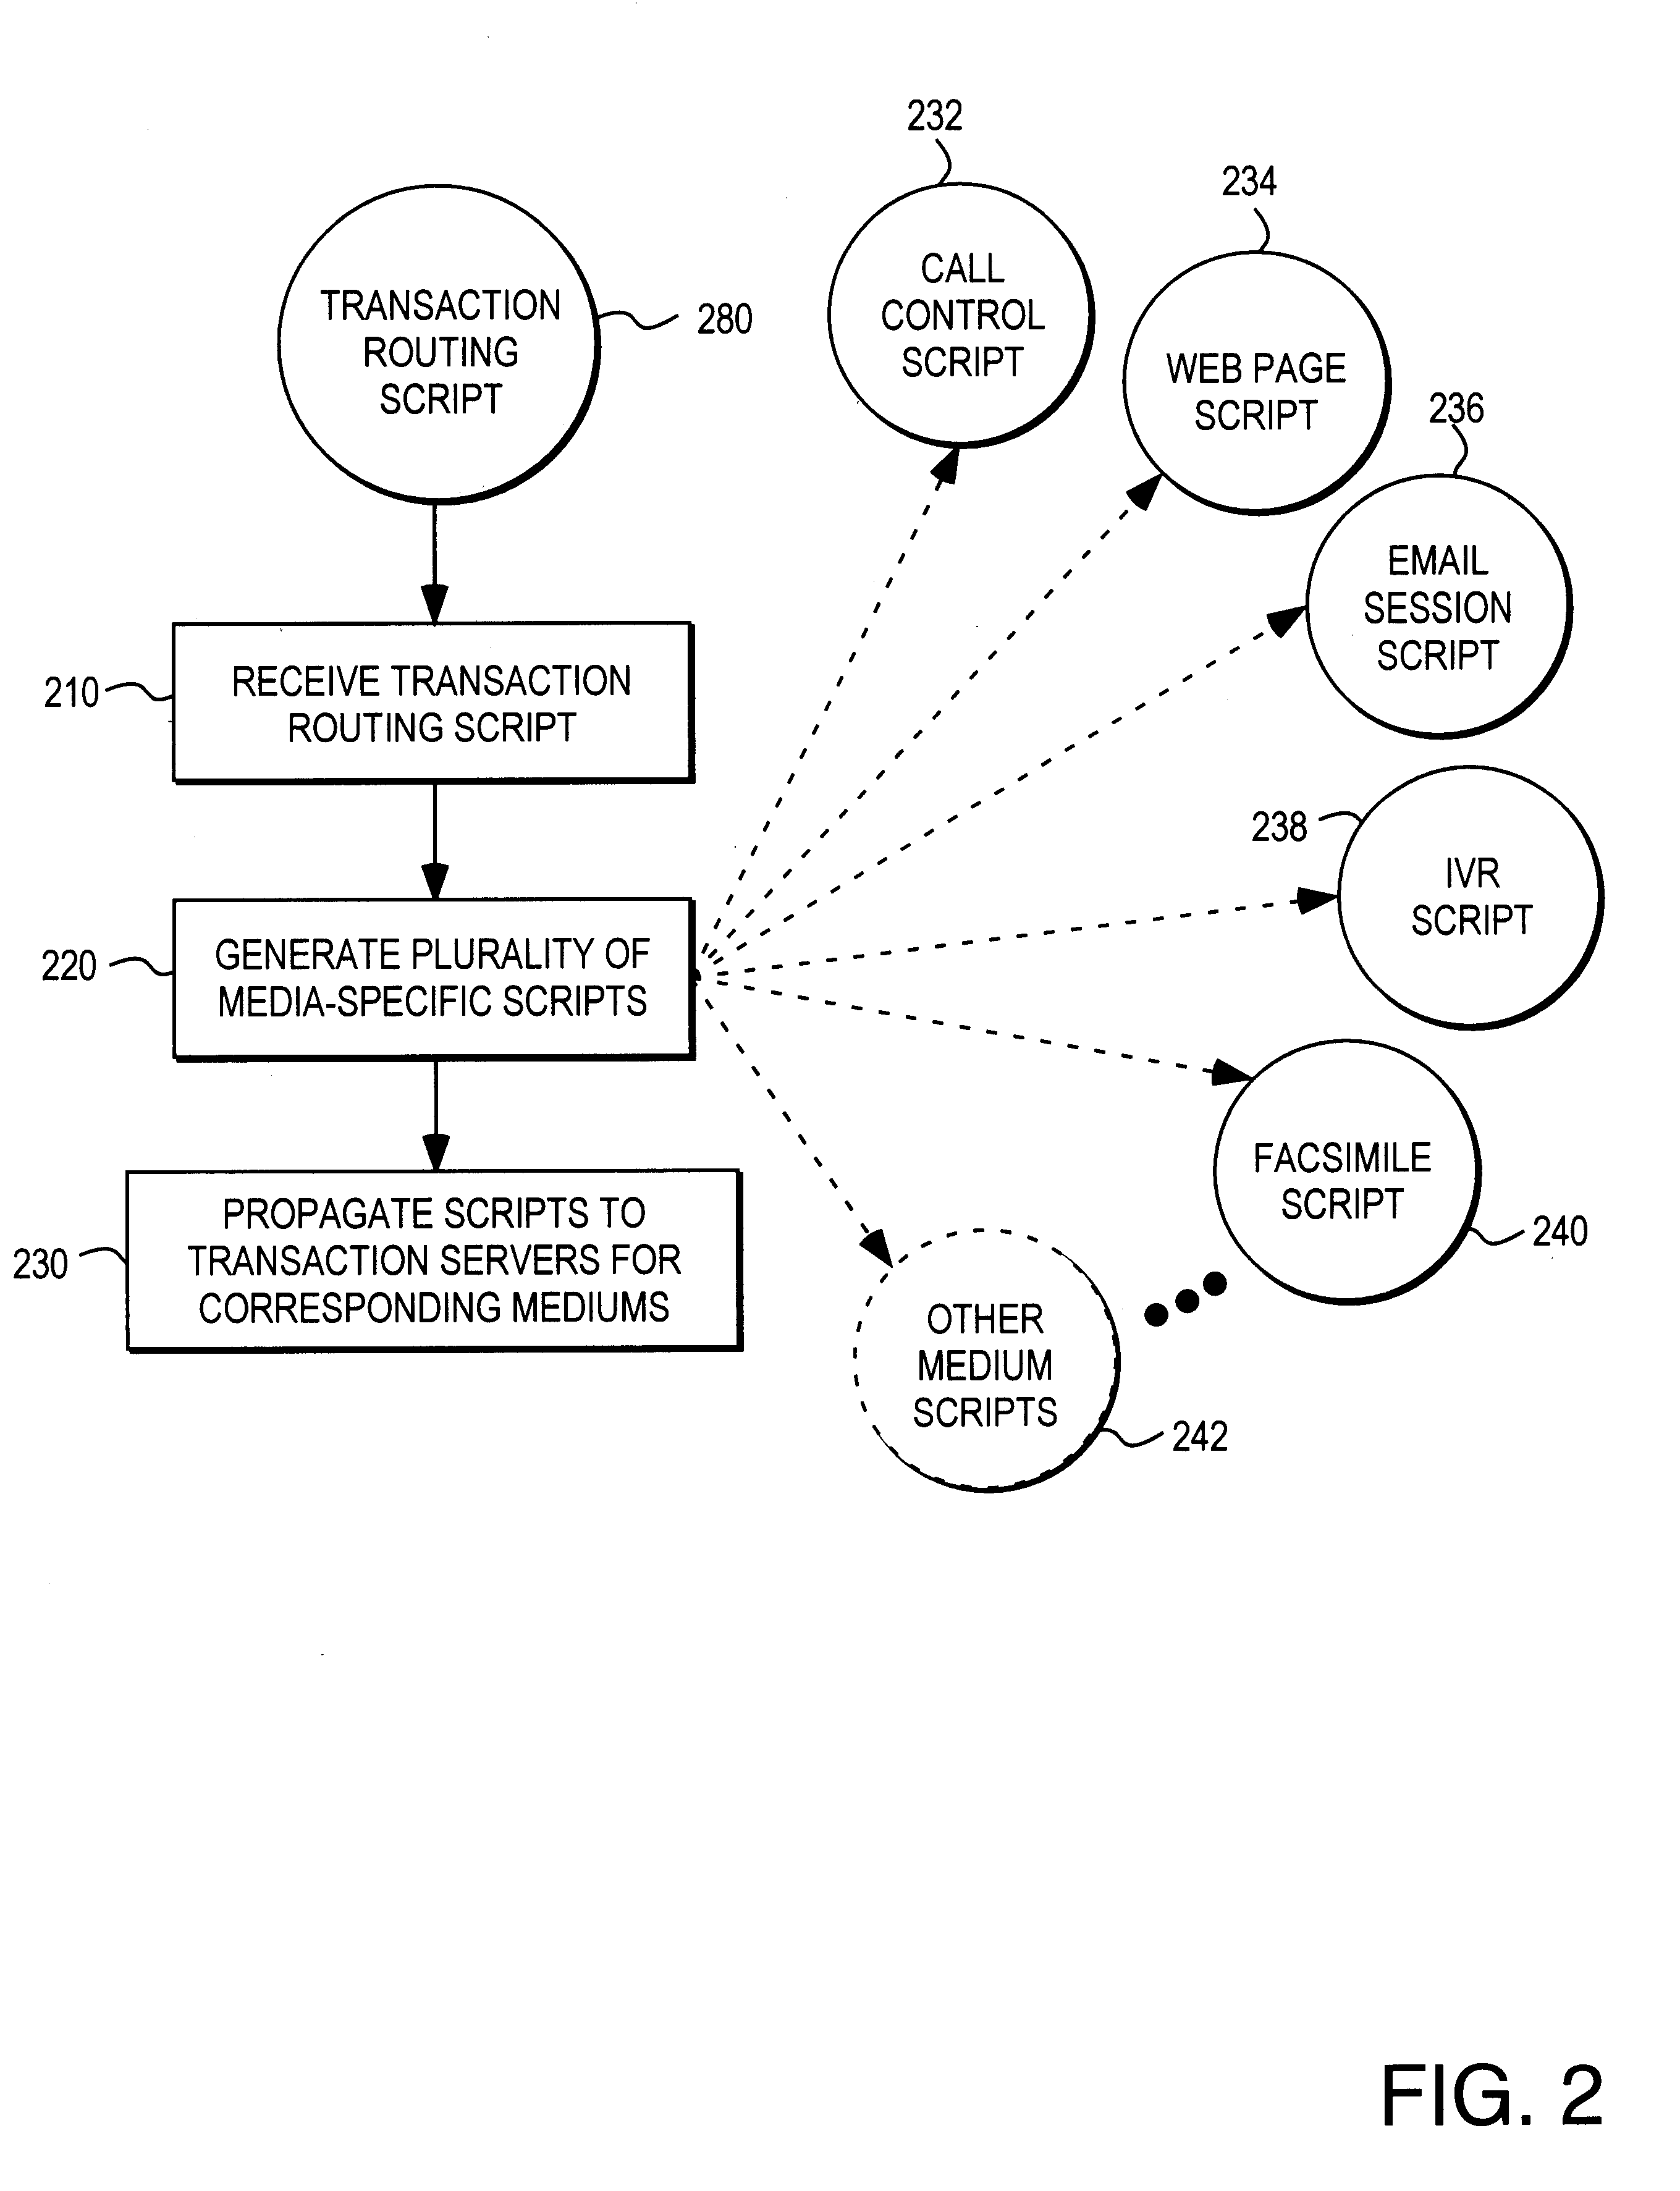 Method for providing consolidated specification and handling of multimedia call prompts